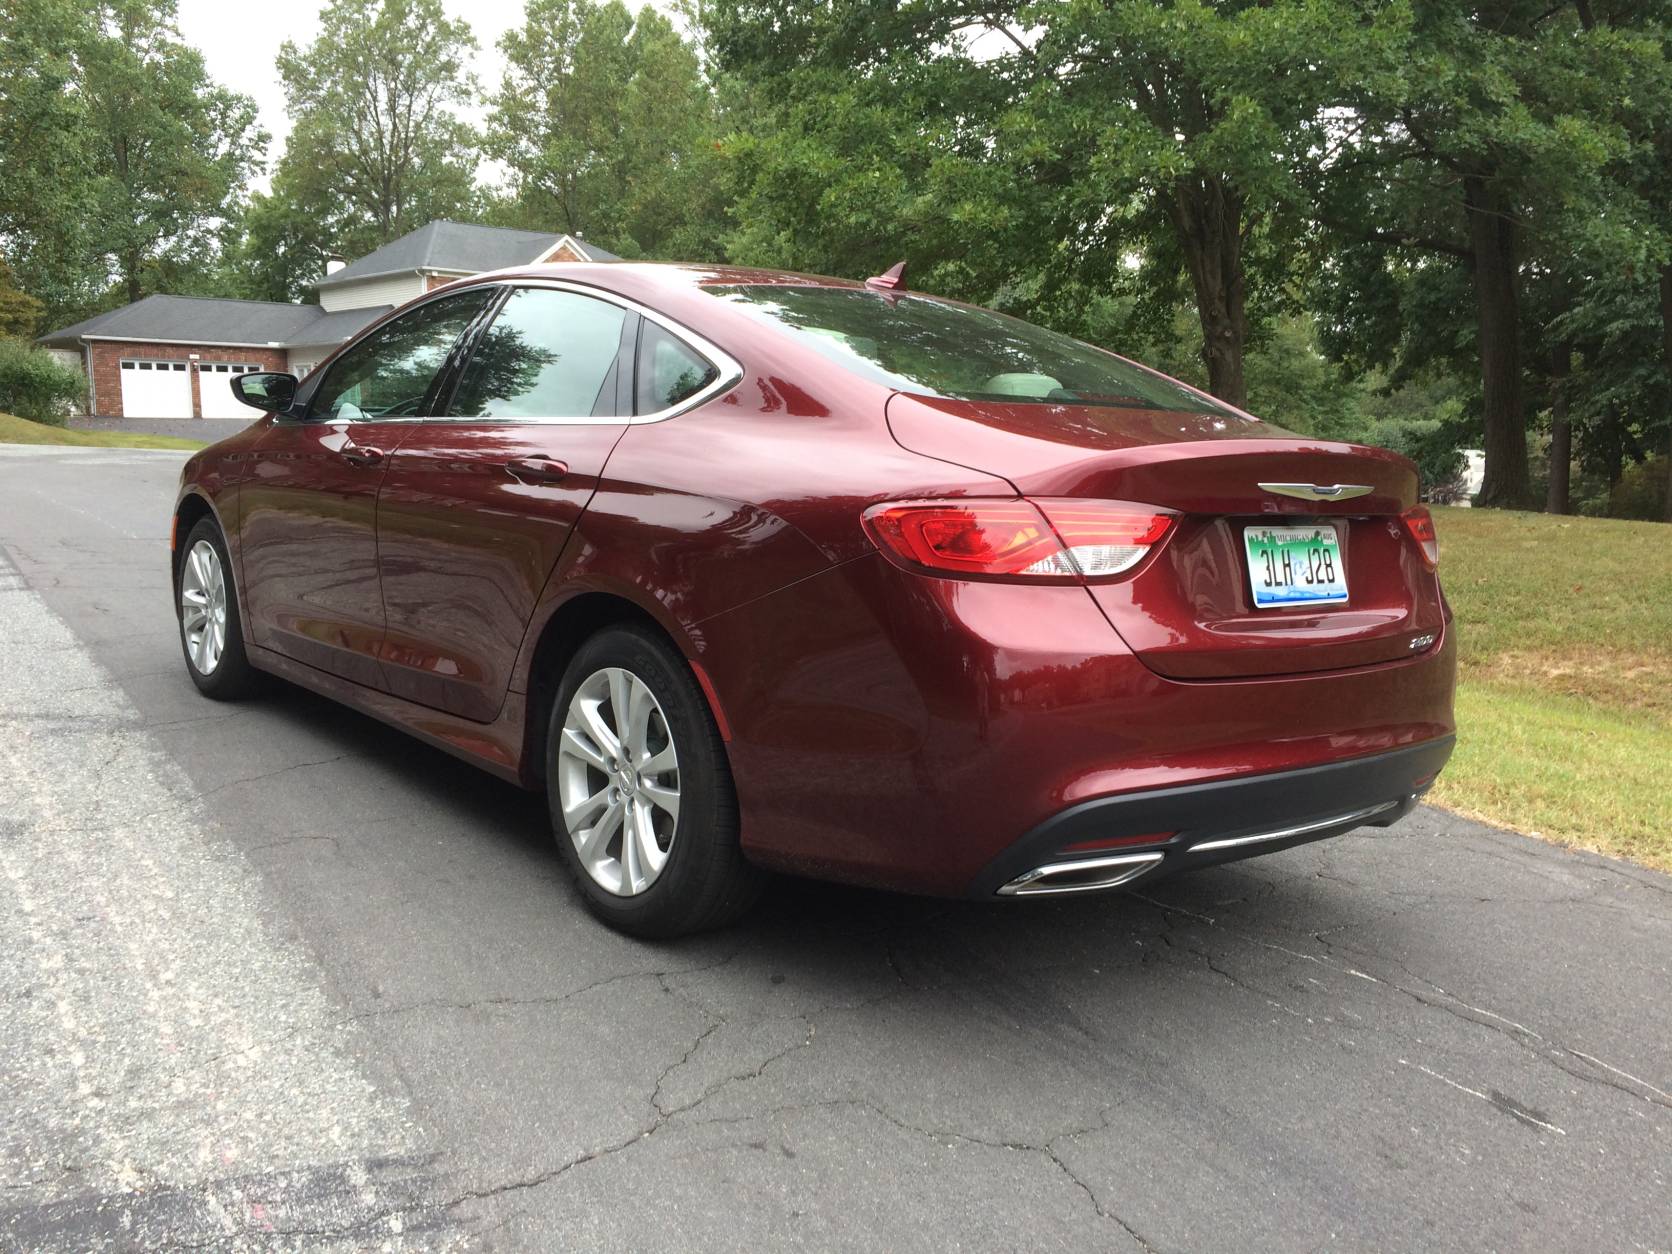 Outside, the styling looks sleek for a mid-size sedan, with a sloping roofline toward the rear of the car. At the rear of the car, dual exhaust spices it up and shouts that you splurged for the bigger V6 engine. (WTOP/Mike Parris)